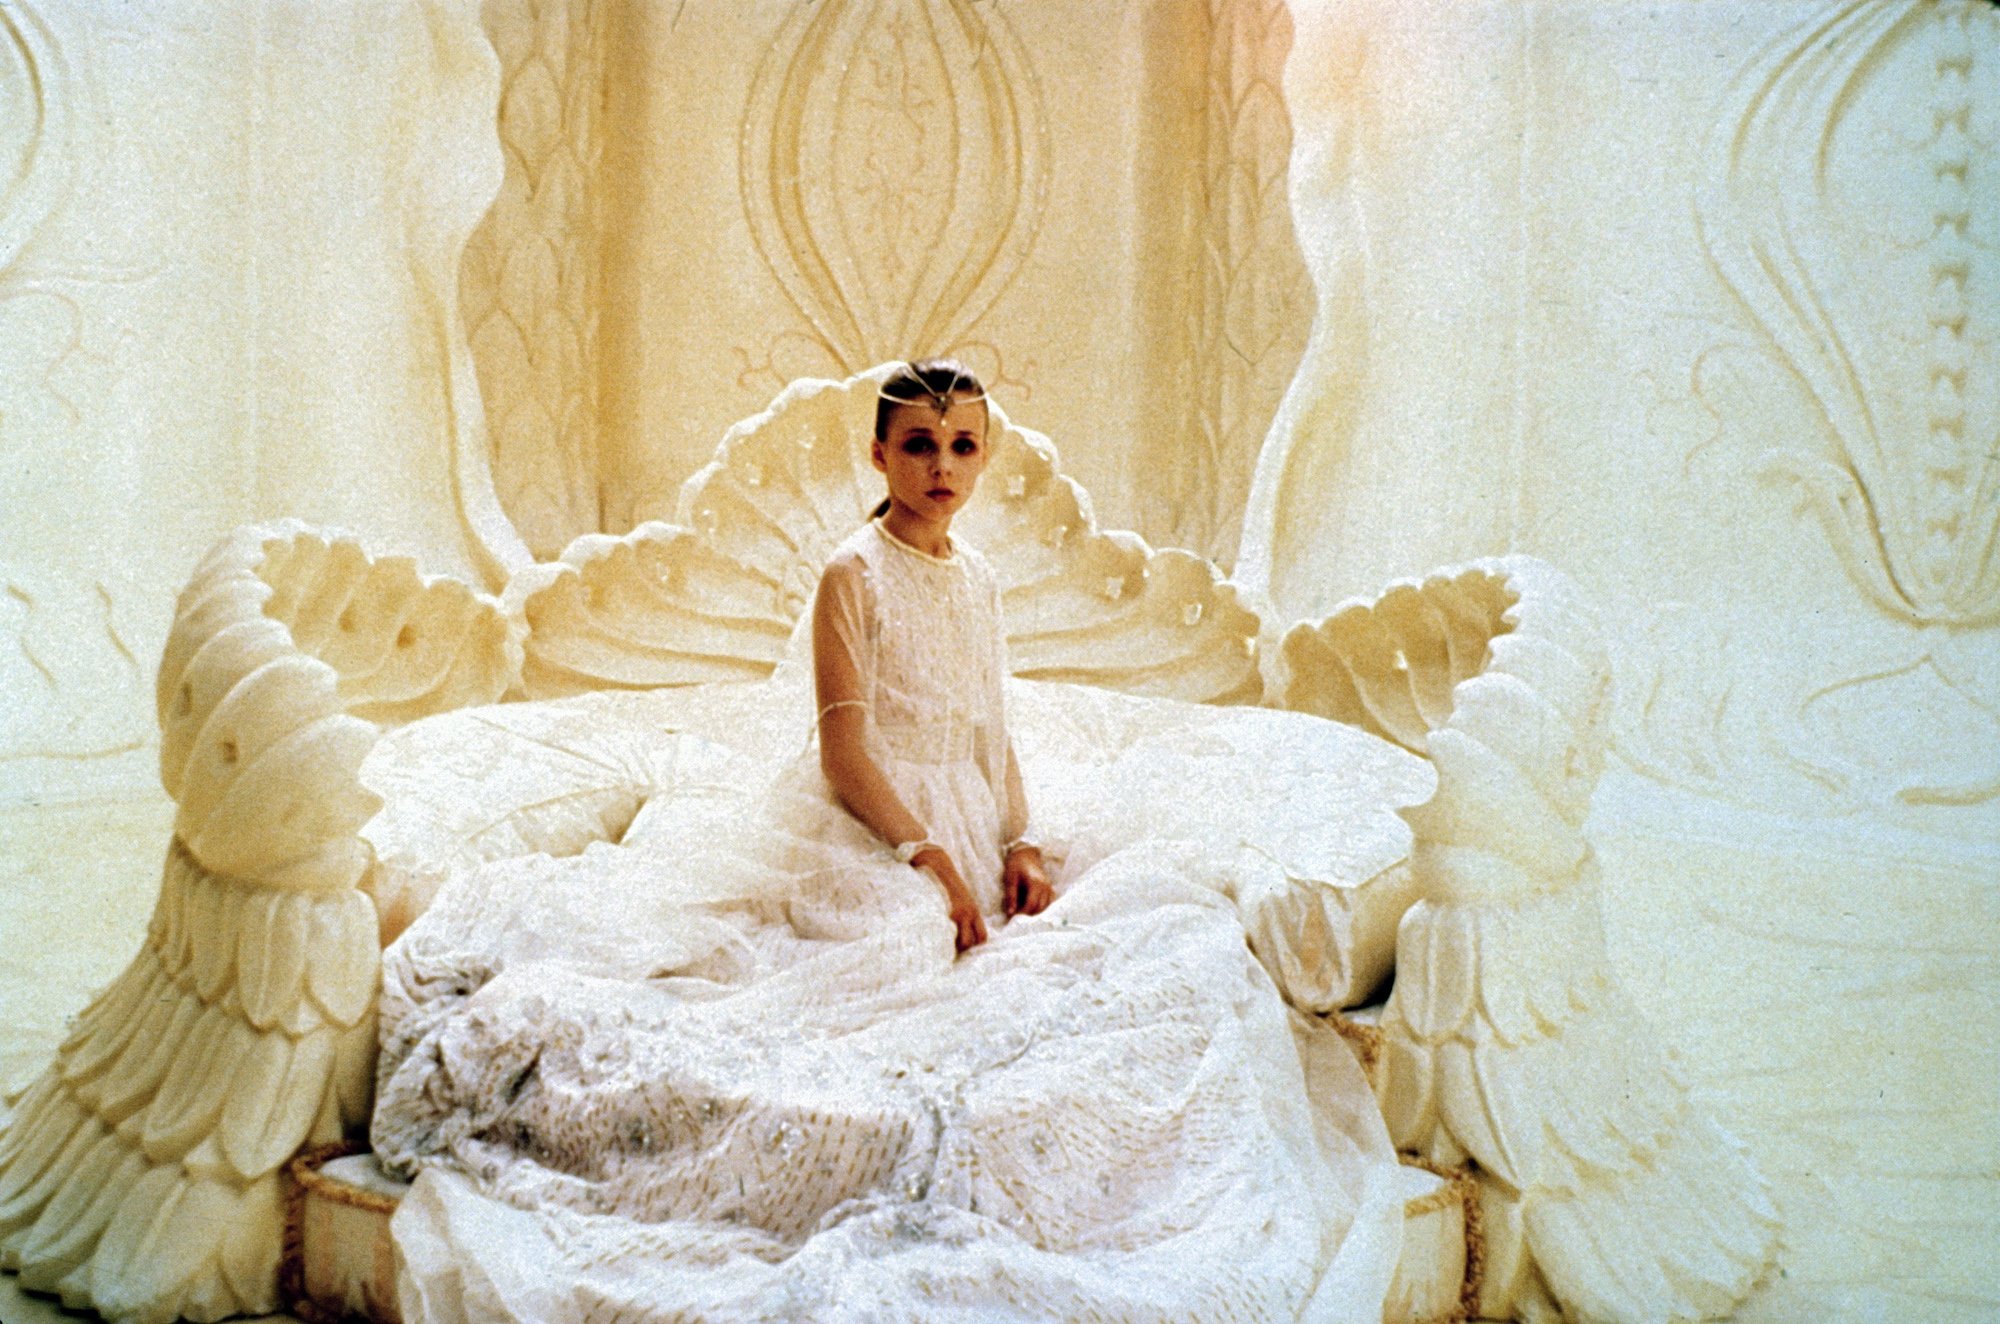 Tami Stronach in 'The NeverEnding Story'